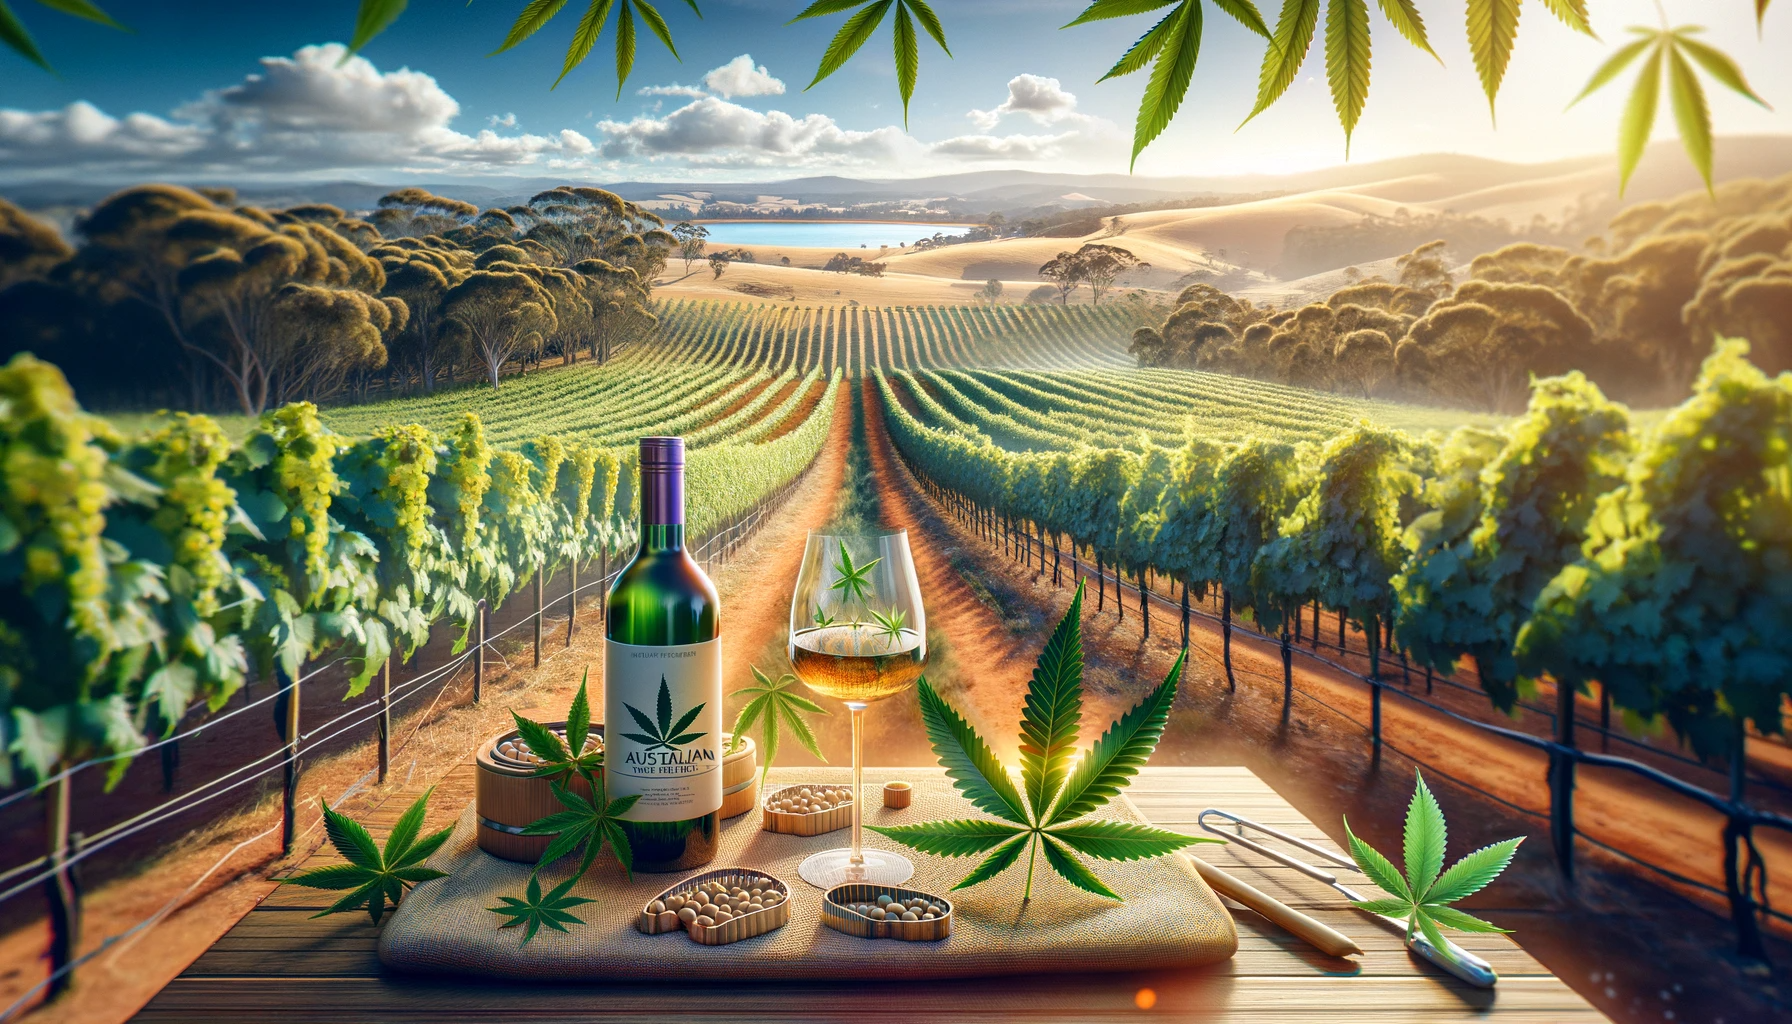 photo-quality 16_9 image for 'Australian Wine Country_ The Rise of CBD-Infused Wines'.